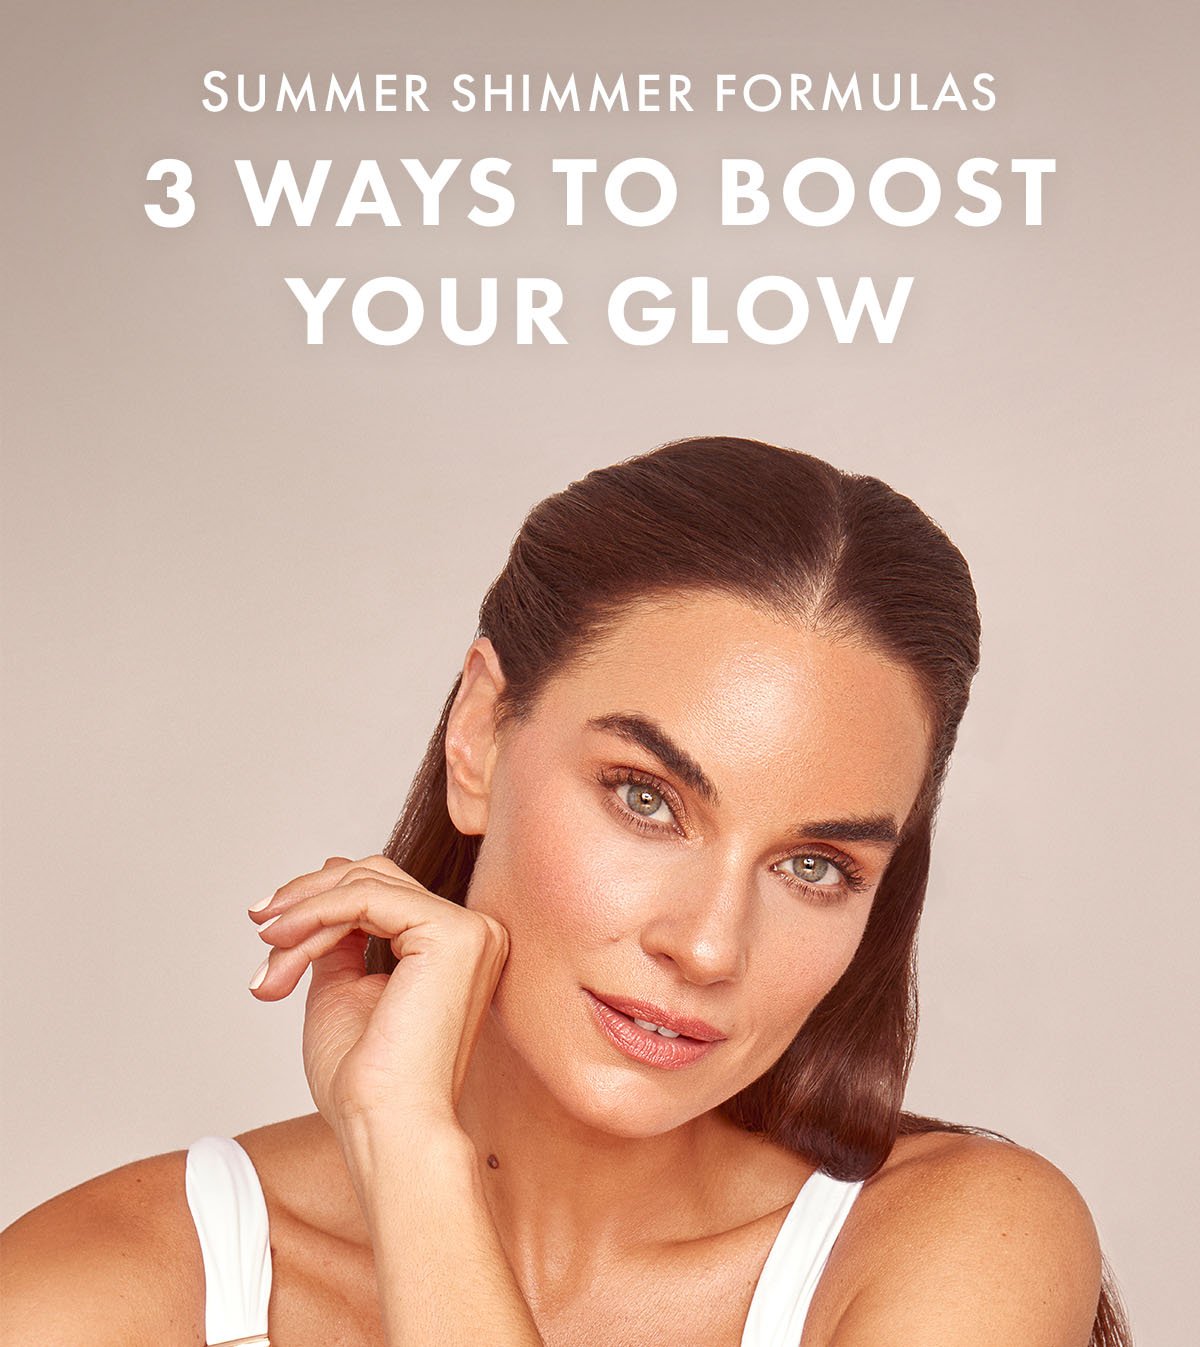 SUMMER SHIMMER FORMULAS 3 WAYS TO BOOST YOUR GLOW